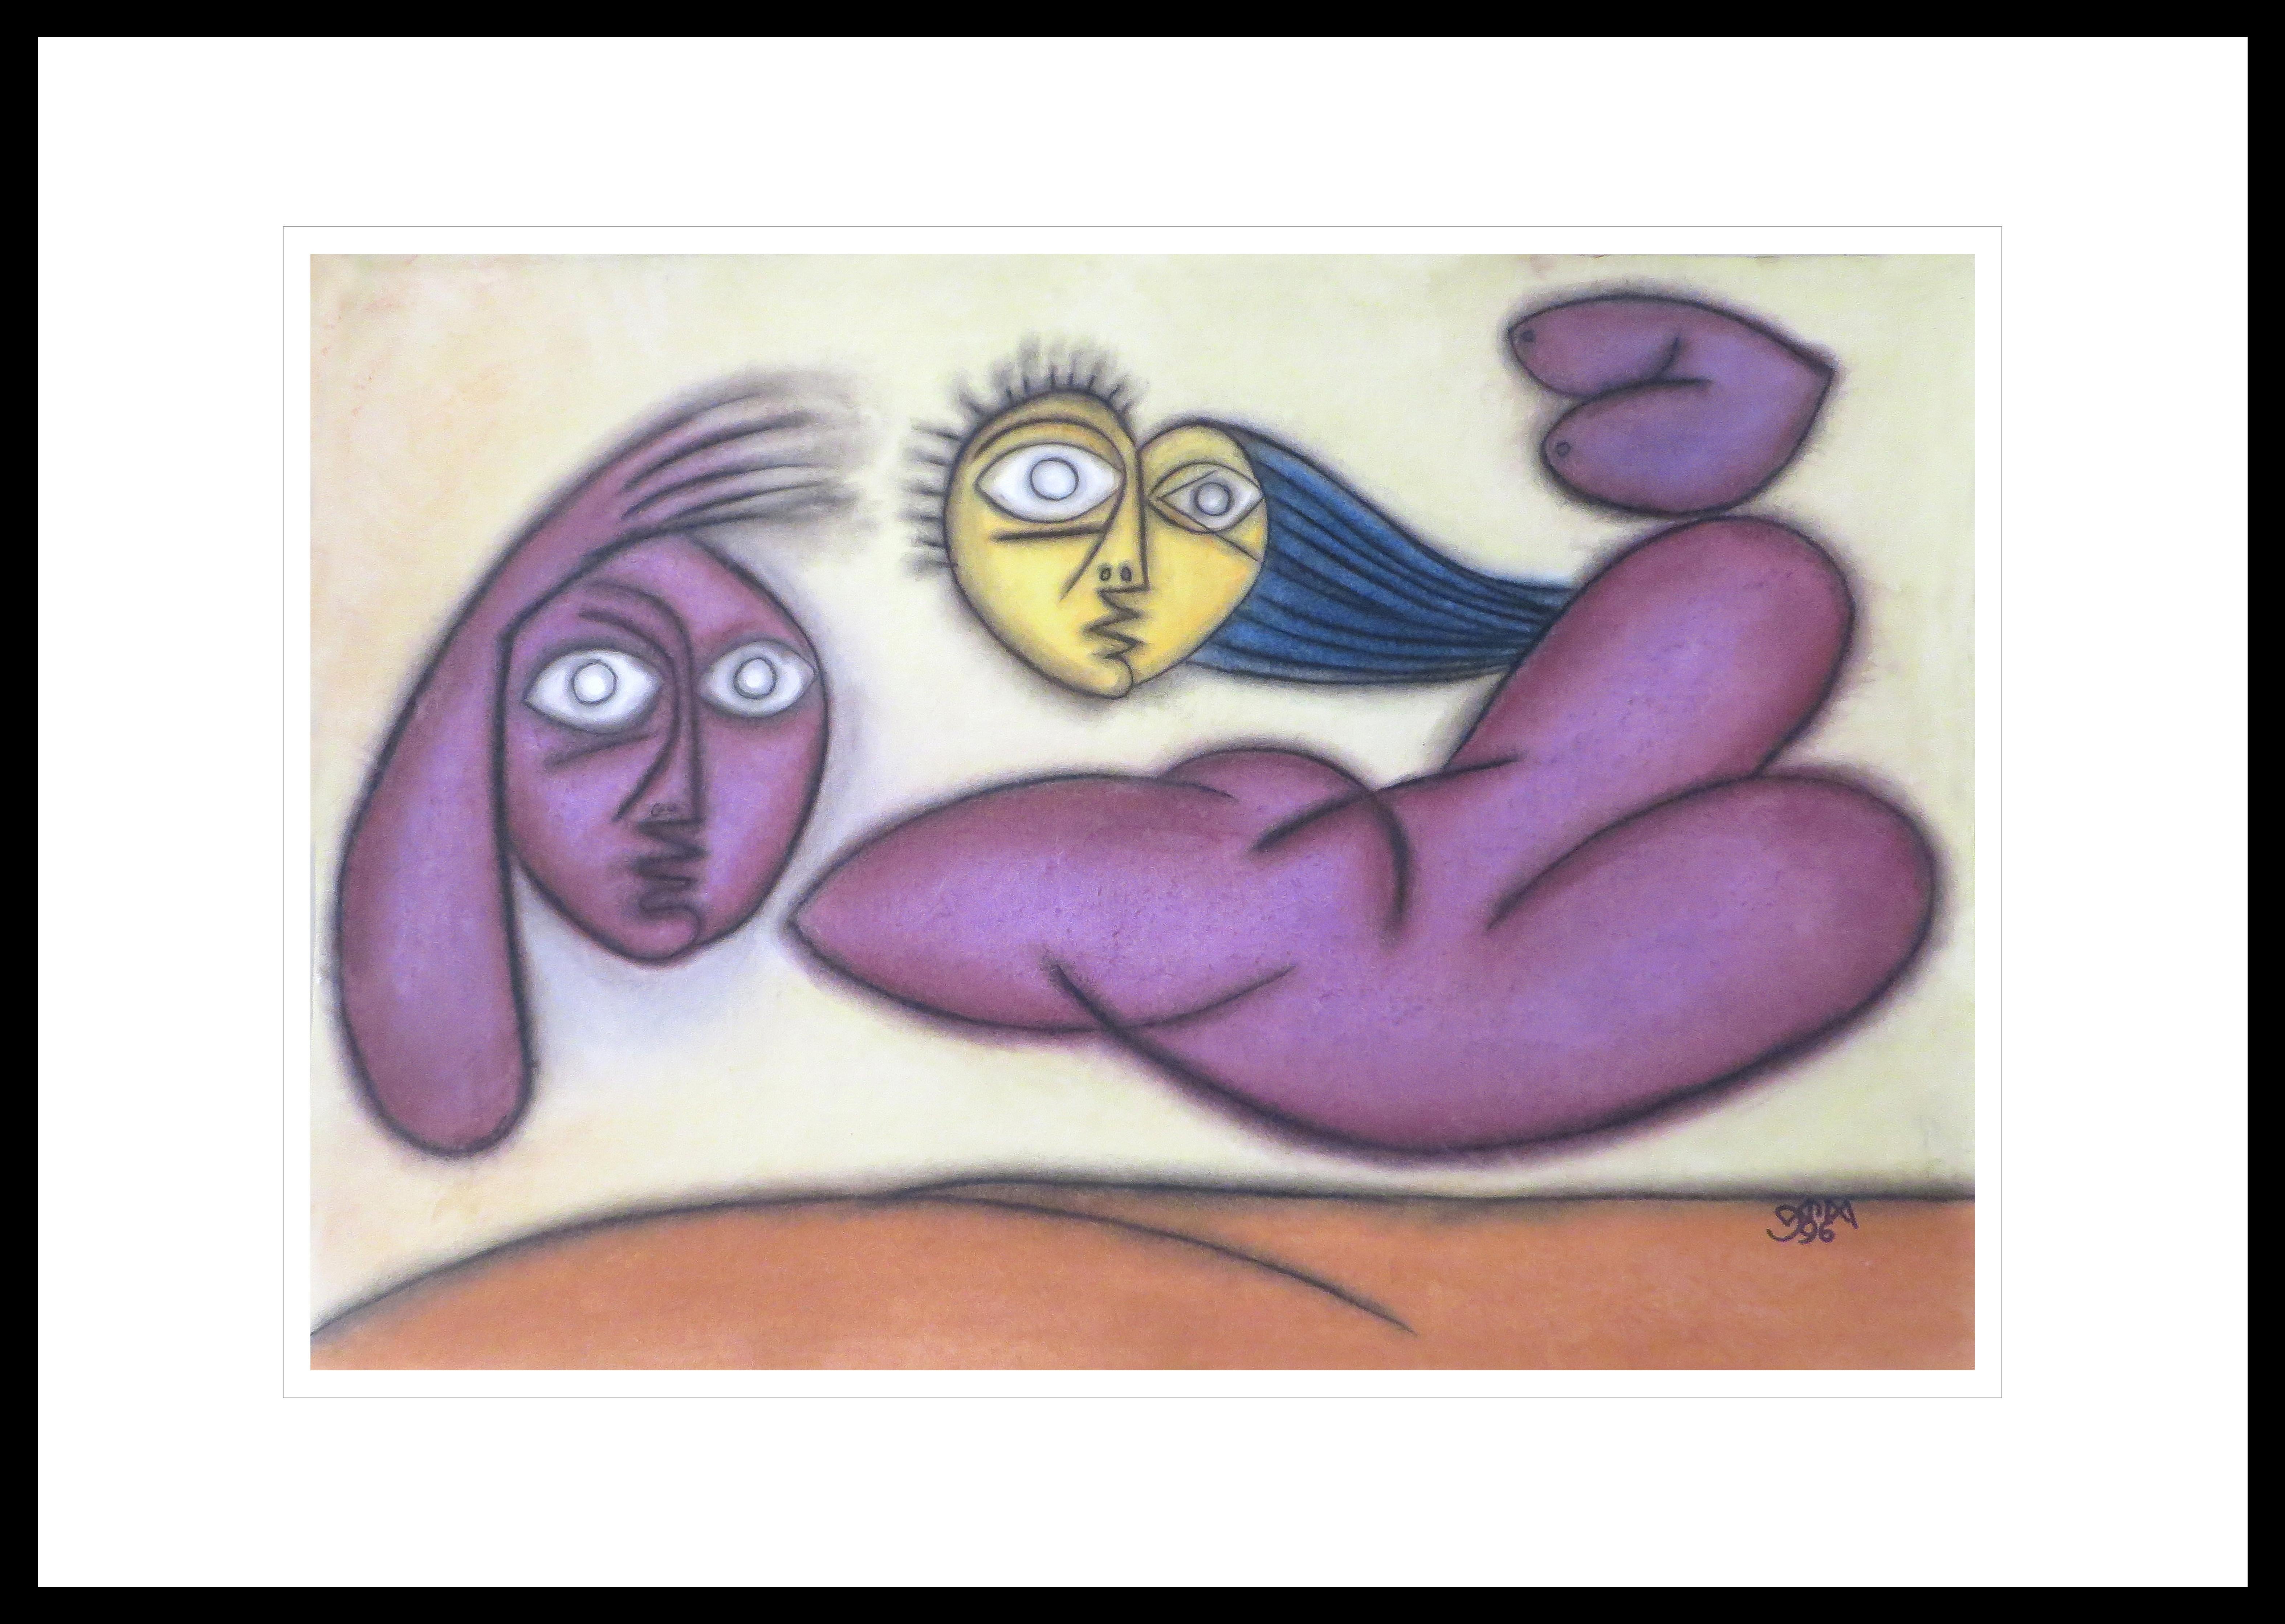 Prokash Karmakar Interior Painting - Face, Large Eyes, Pastel on Board, Violet, Blue, Brown by Indian Artist"In Stock"